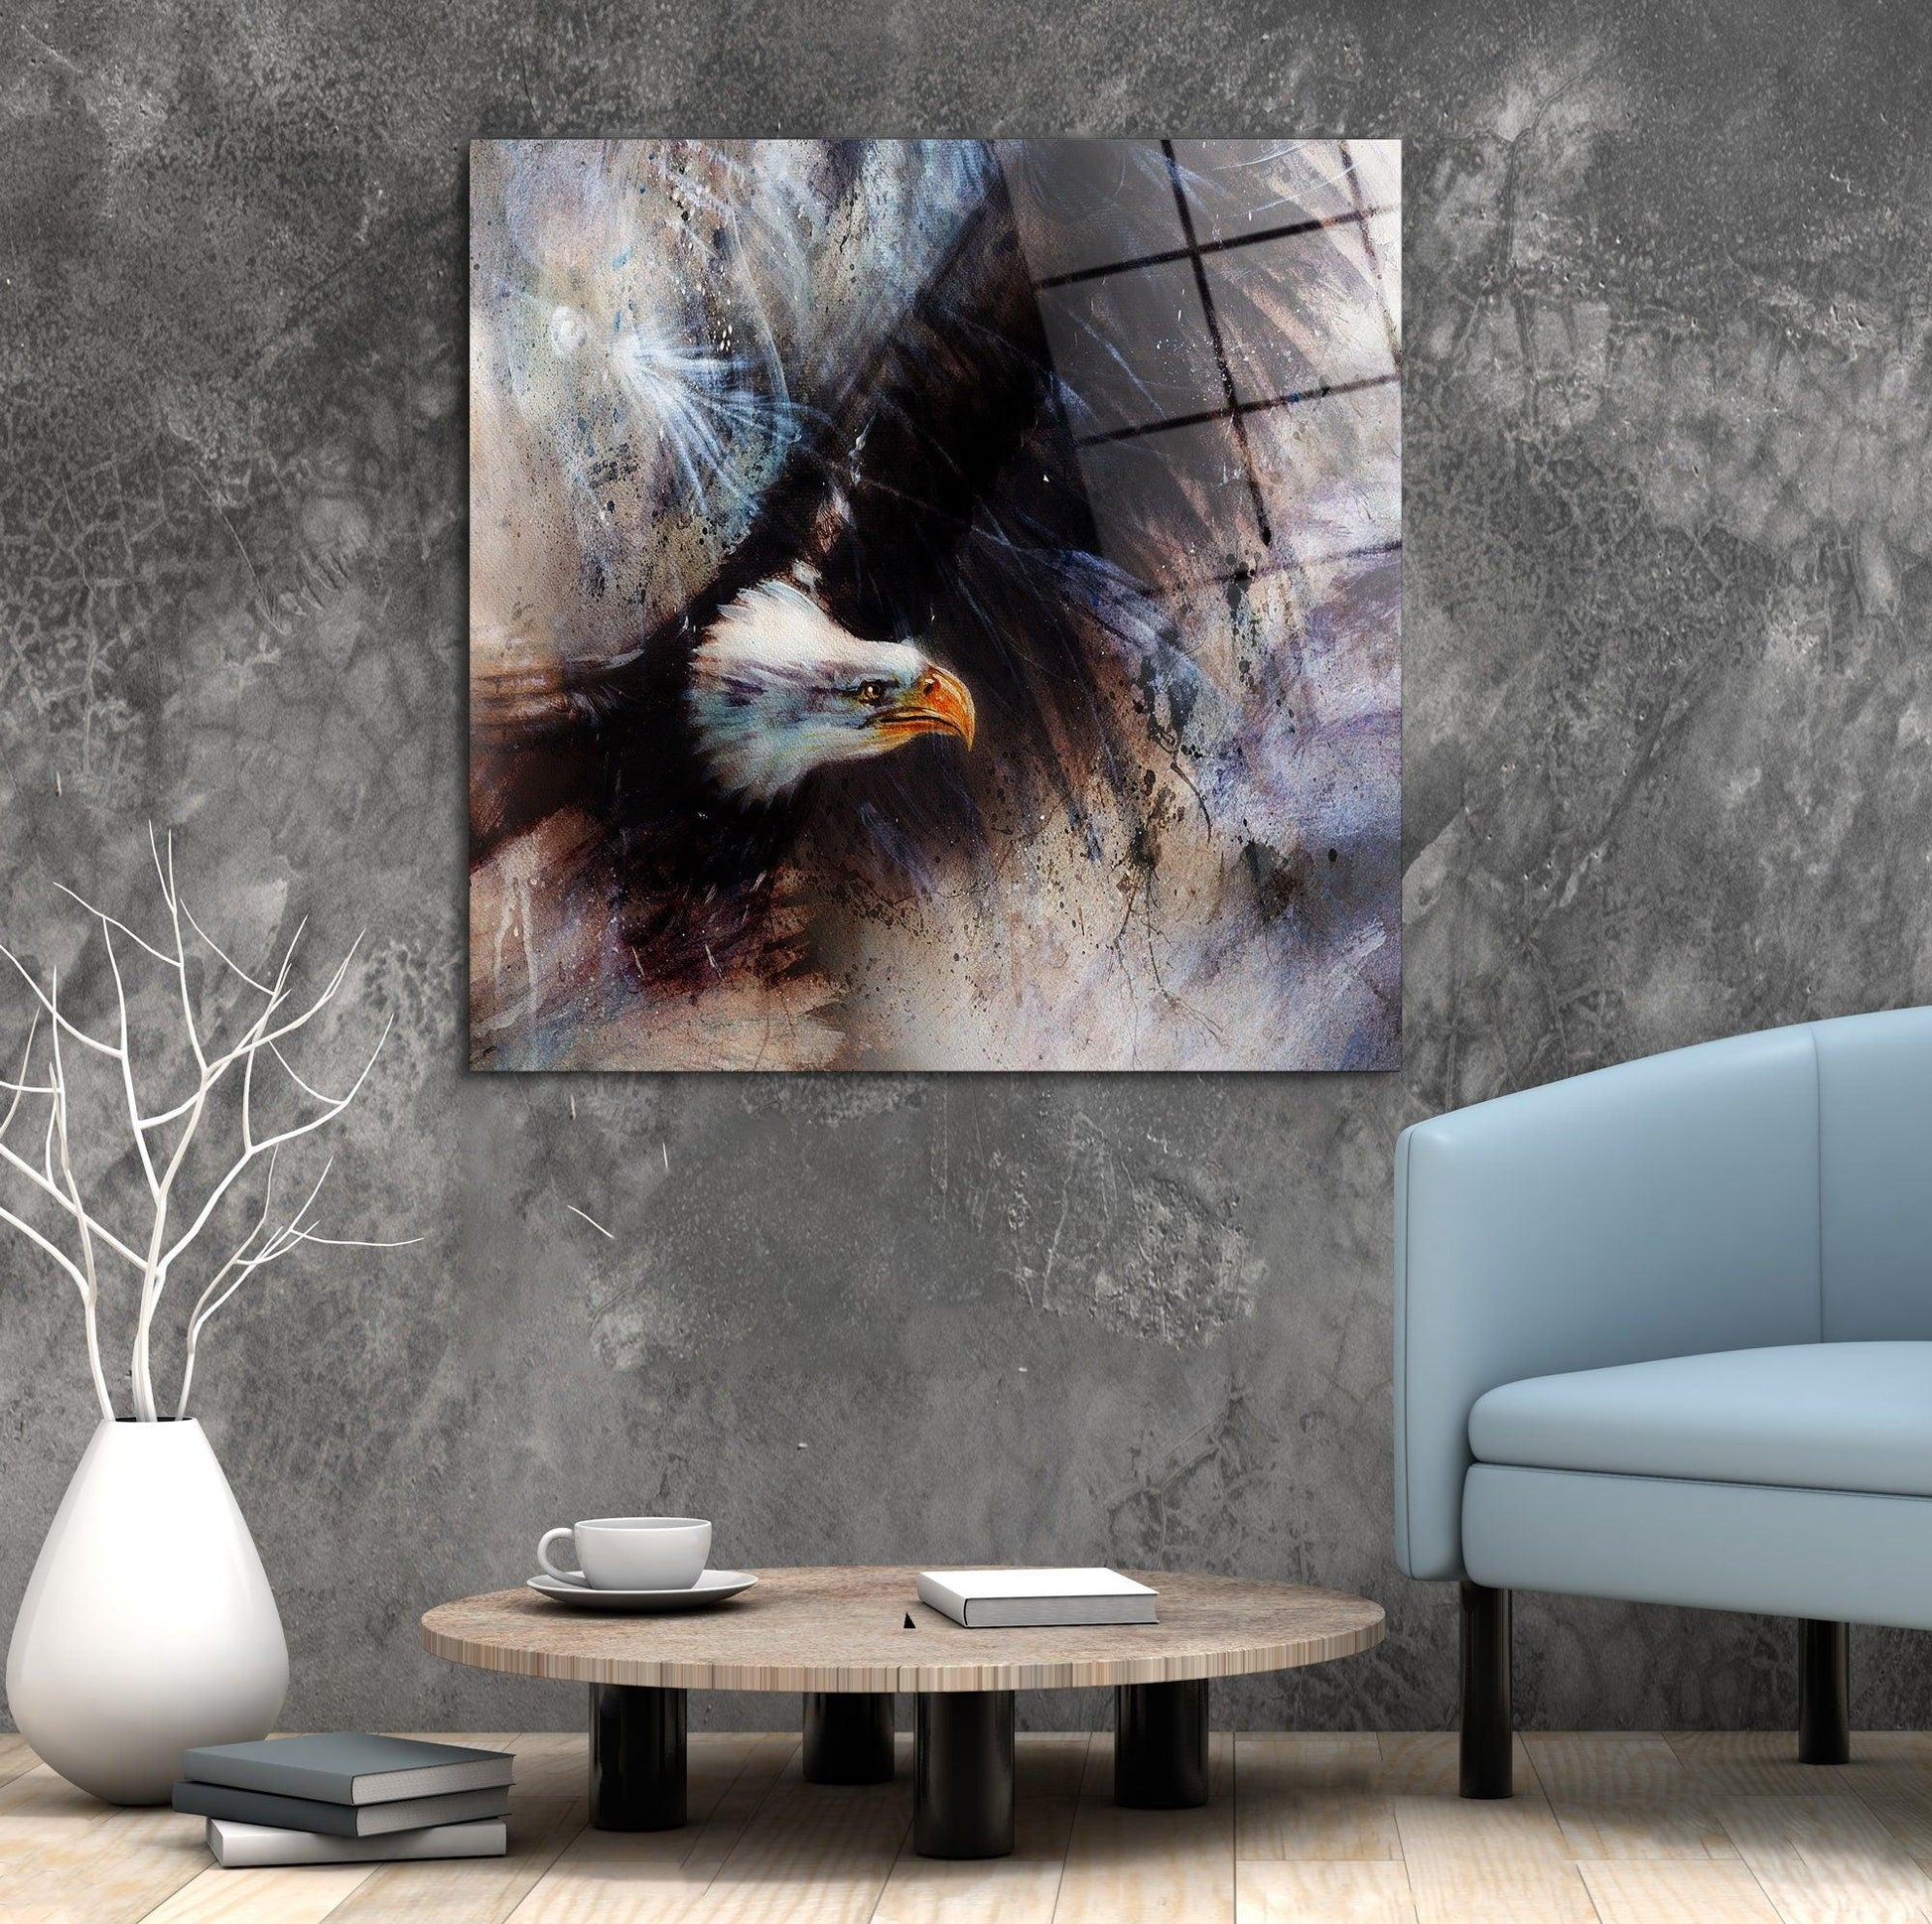 Abstract Eagle Printed glass wall art| gift for new home, Eagle wall decor, Eagle poster, home decor artwork, New Home Housewarming